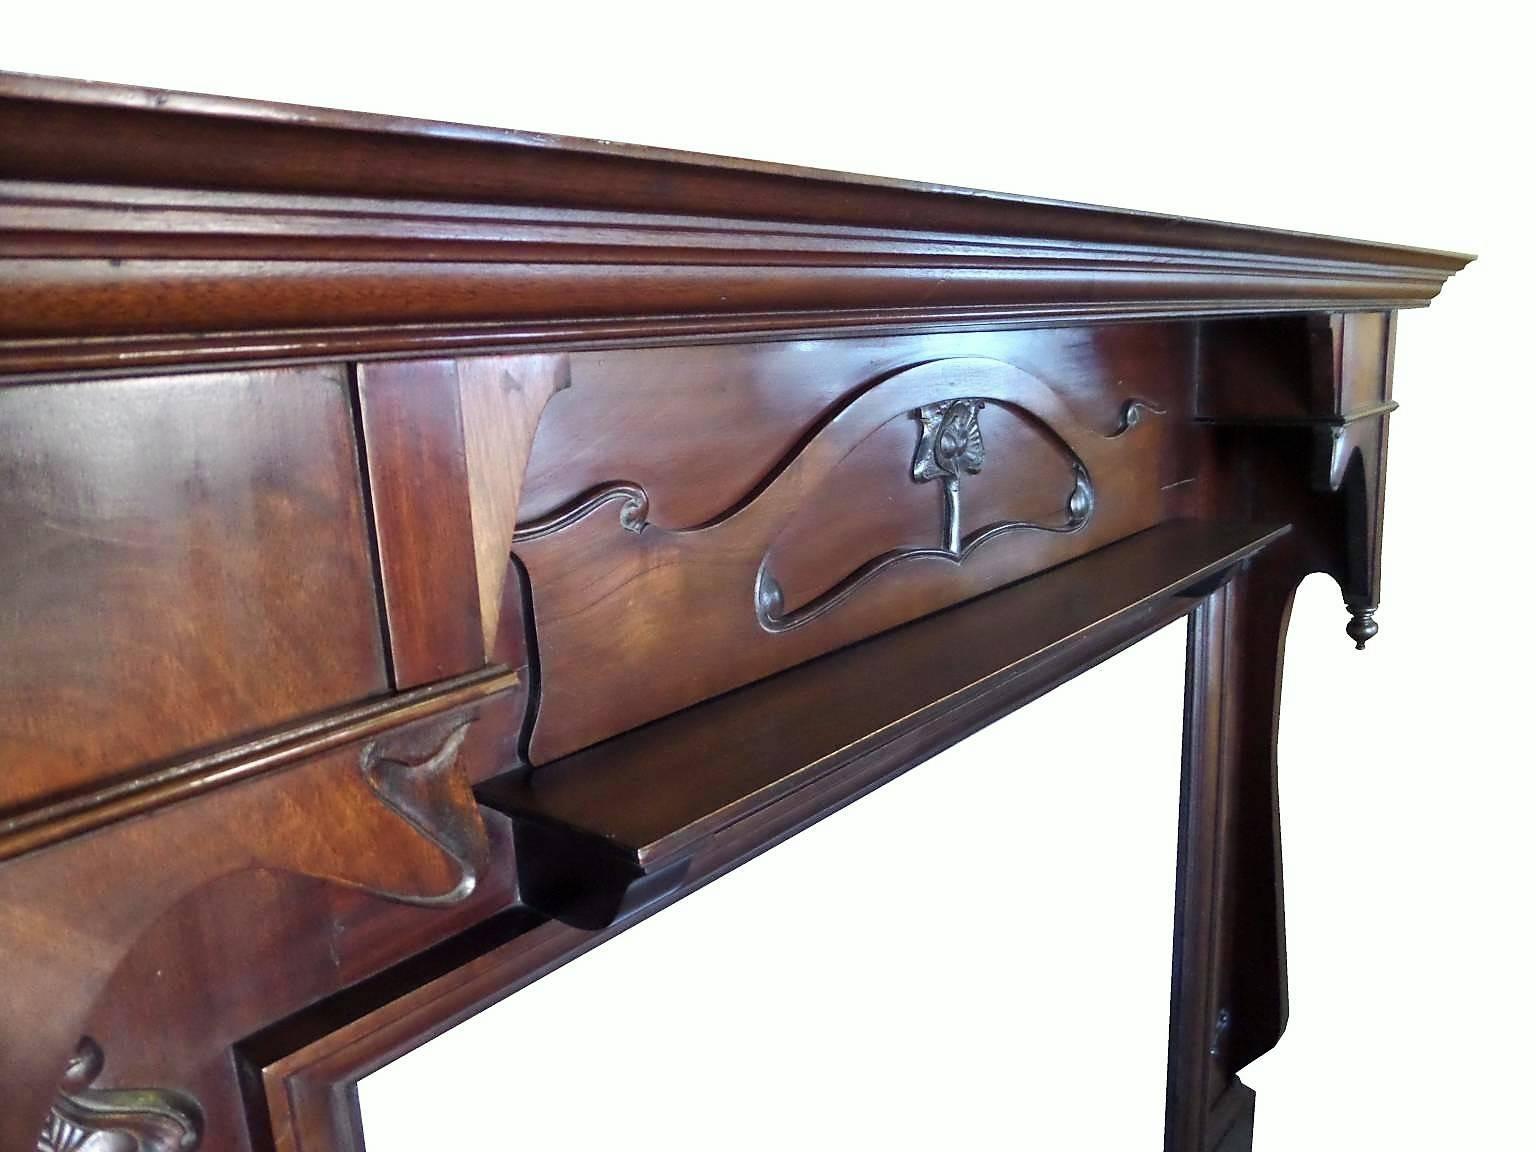 Early 20th Century Art Nouveau Large Mahogany Wood Fireplace Mantel In Good Condition For Sale In Leicester, Leicestershire